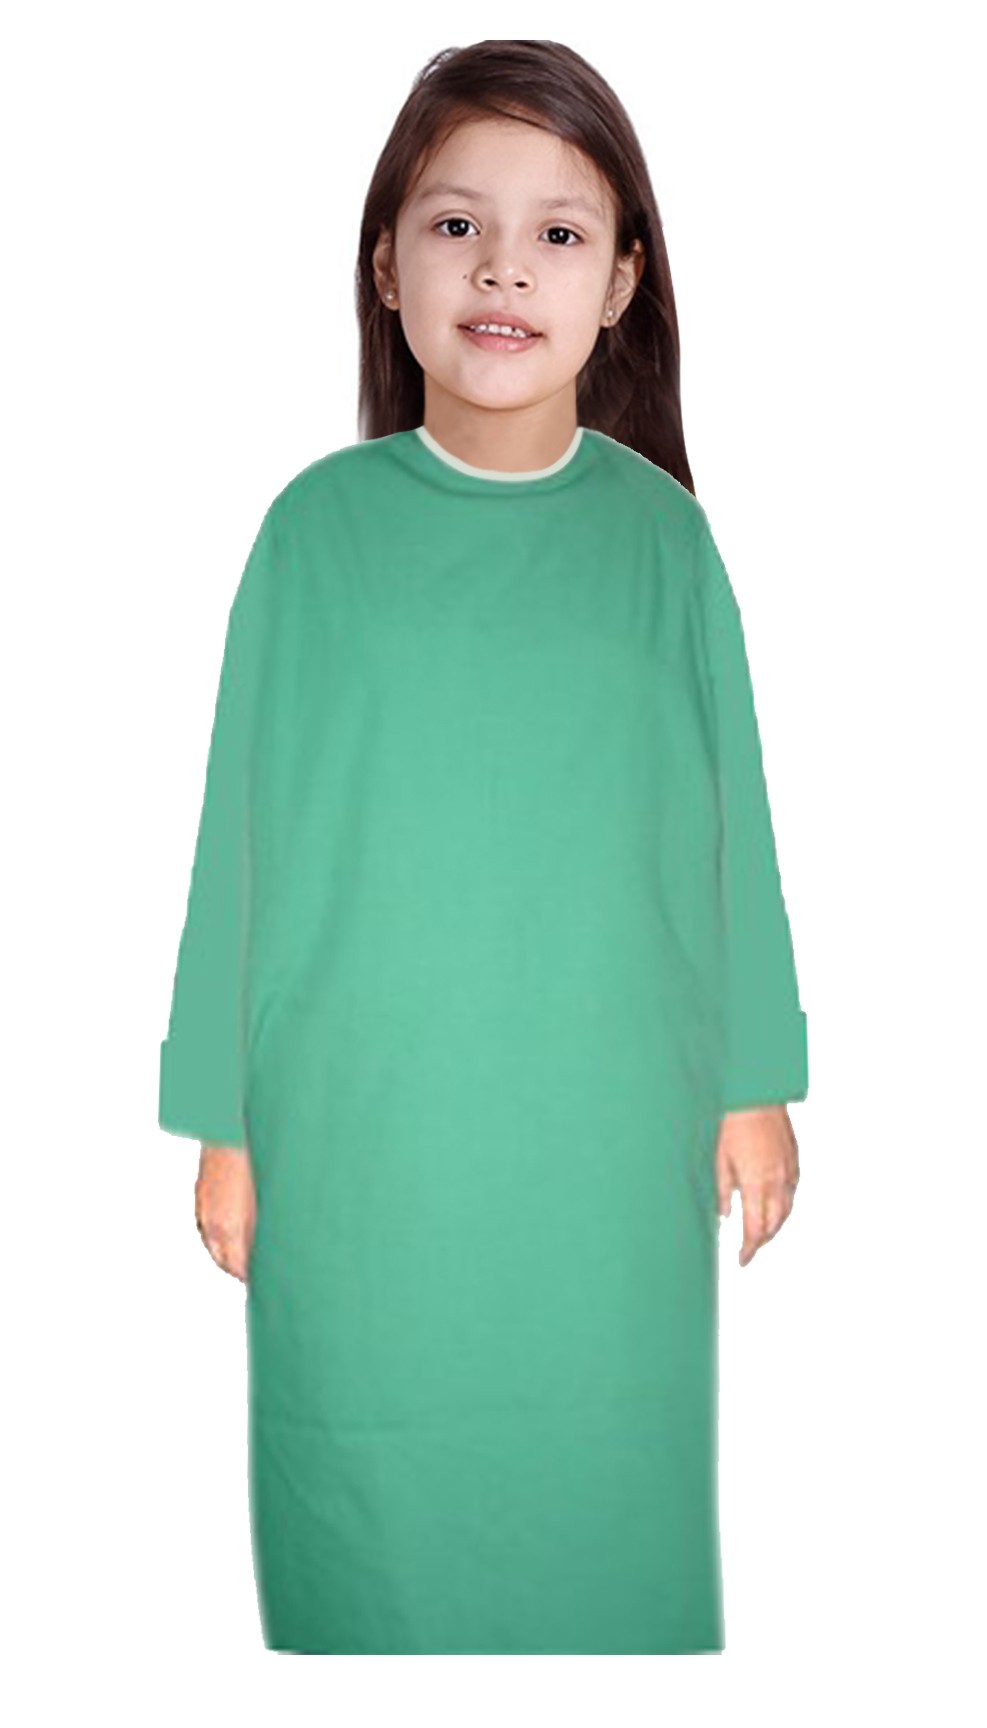 Children Patient Gown Full Sleeve with Matching piping Back Open, Tie-able from Two Points Chest 33 Inches Length 26 Inches And Chest 41 Inches Length 35 Inches (Available in 37 Color)